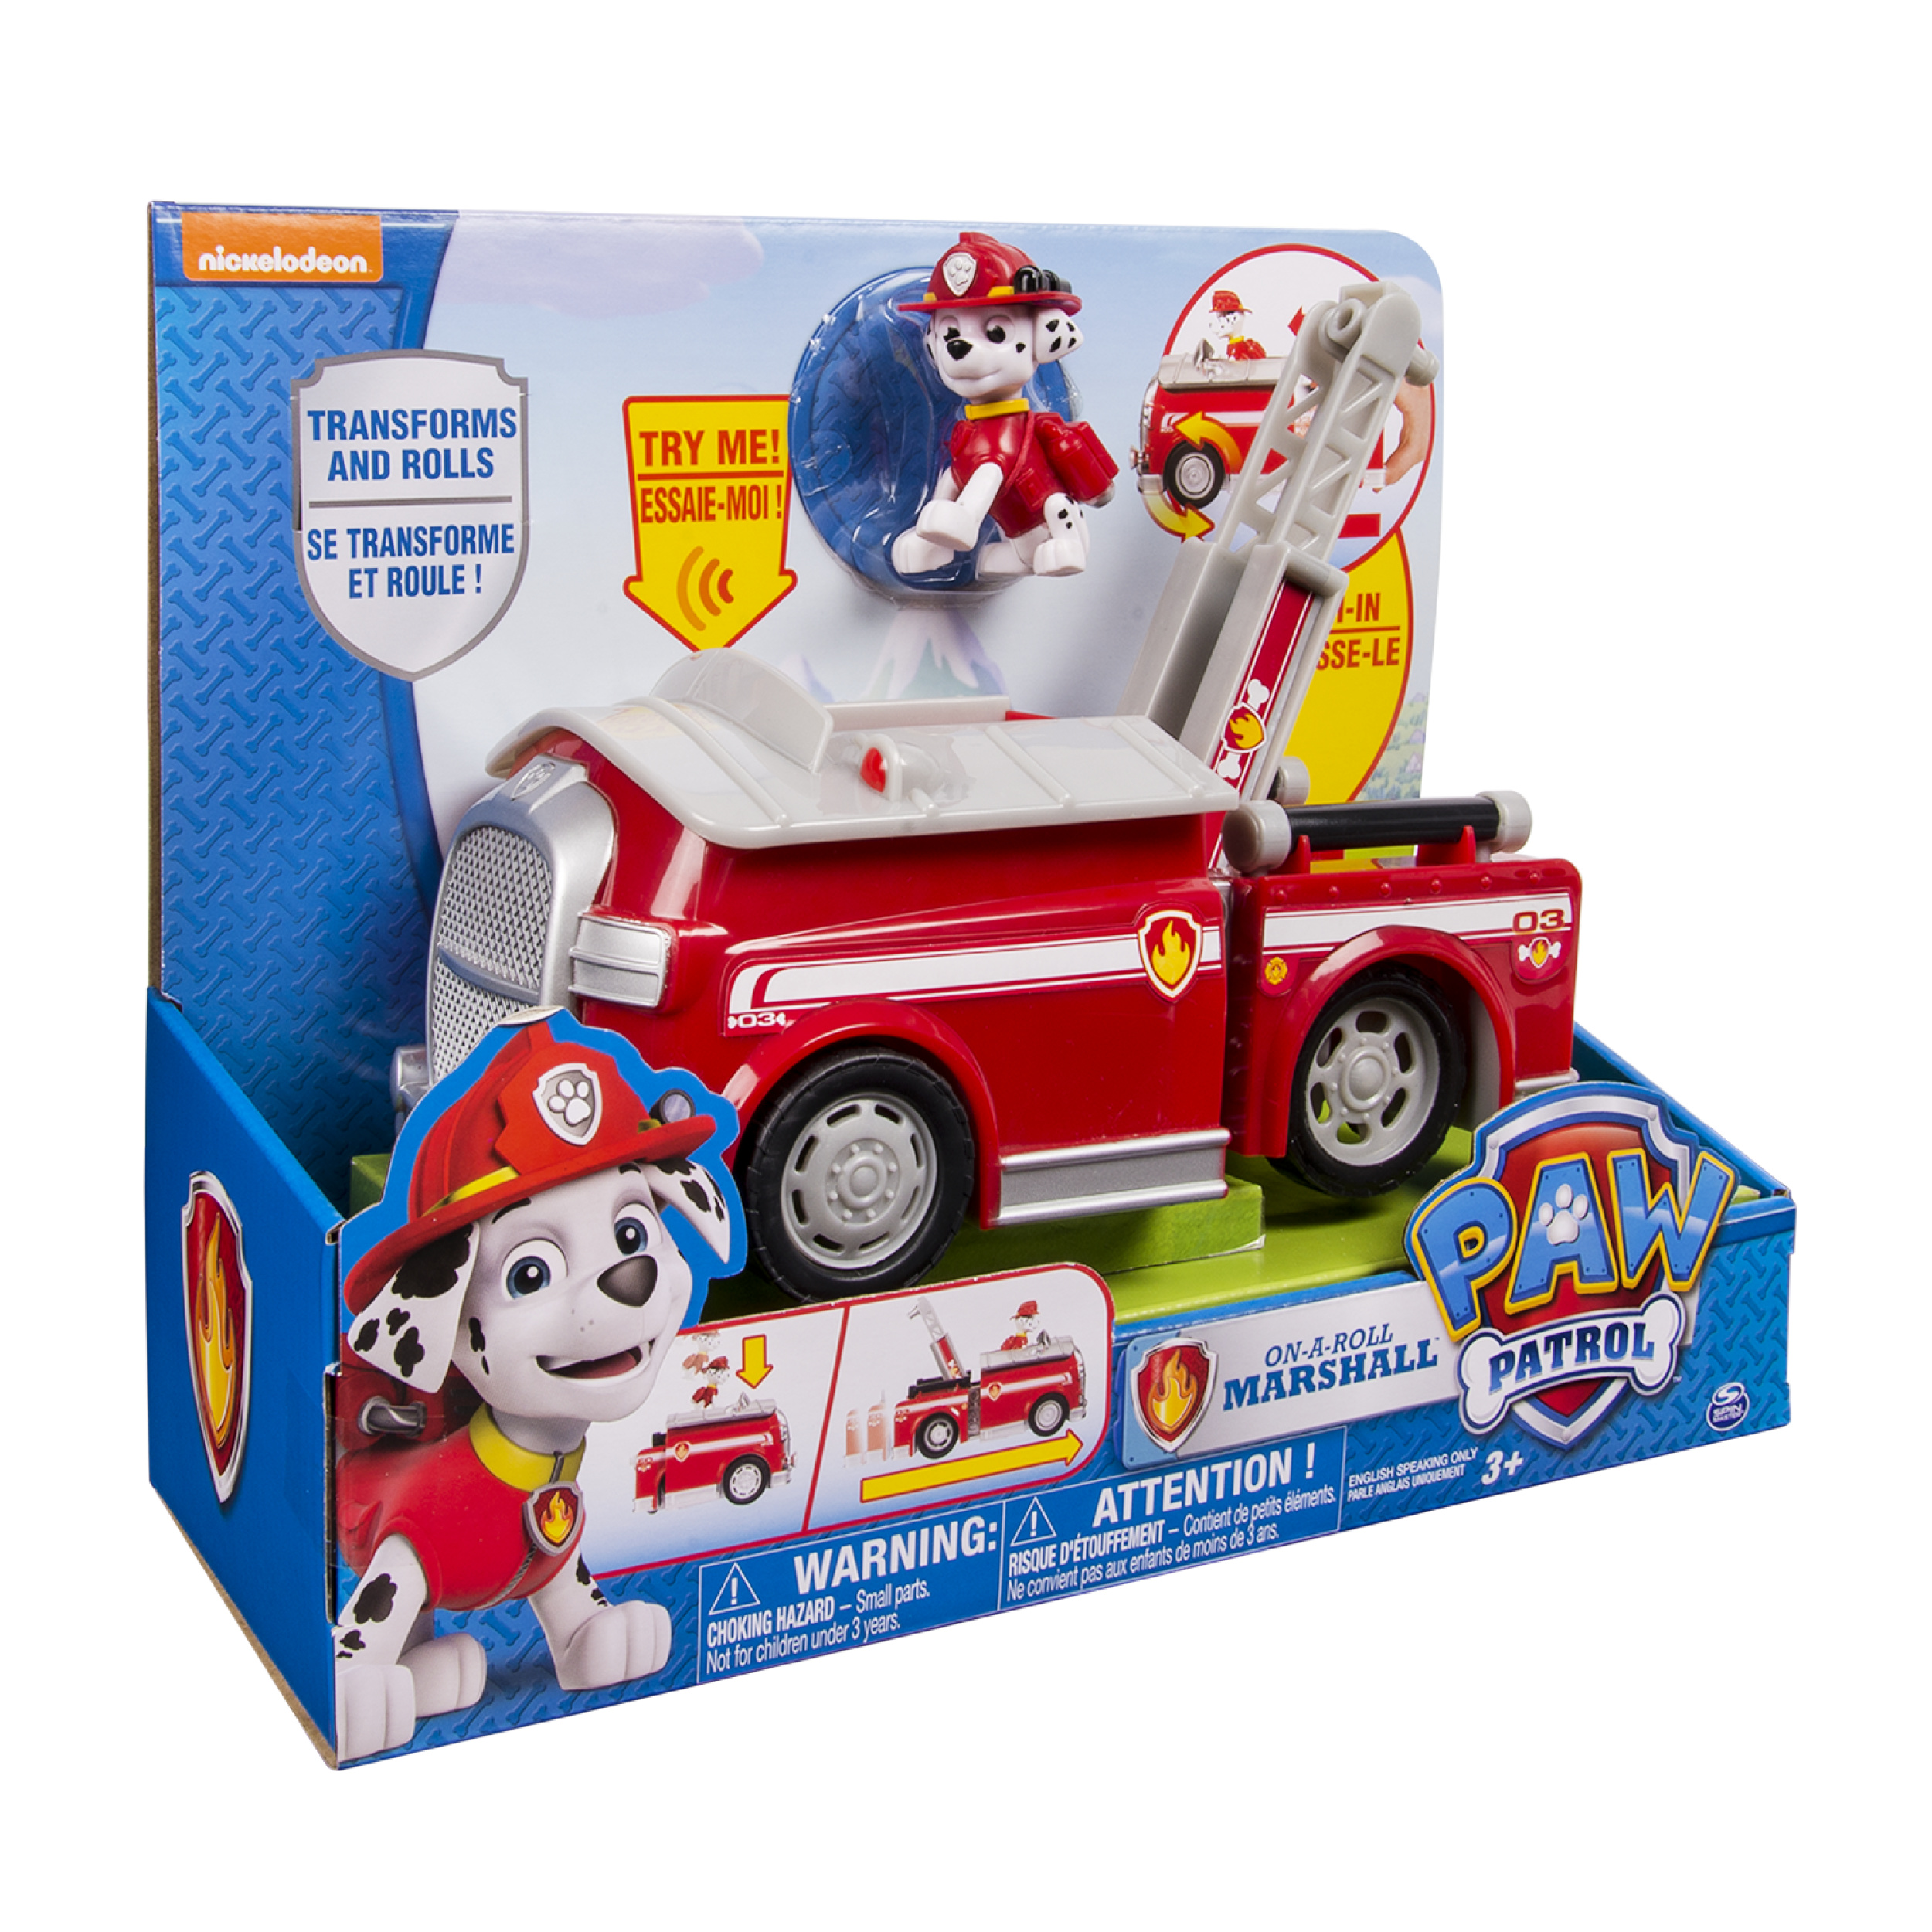 Paw Patrol On A Roll Marshall, Figure and Vehicle with Sounds - image 4 of 4